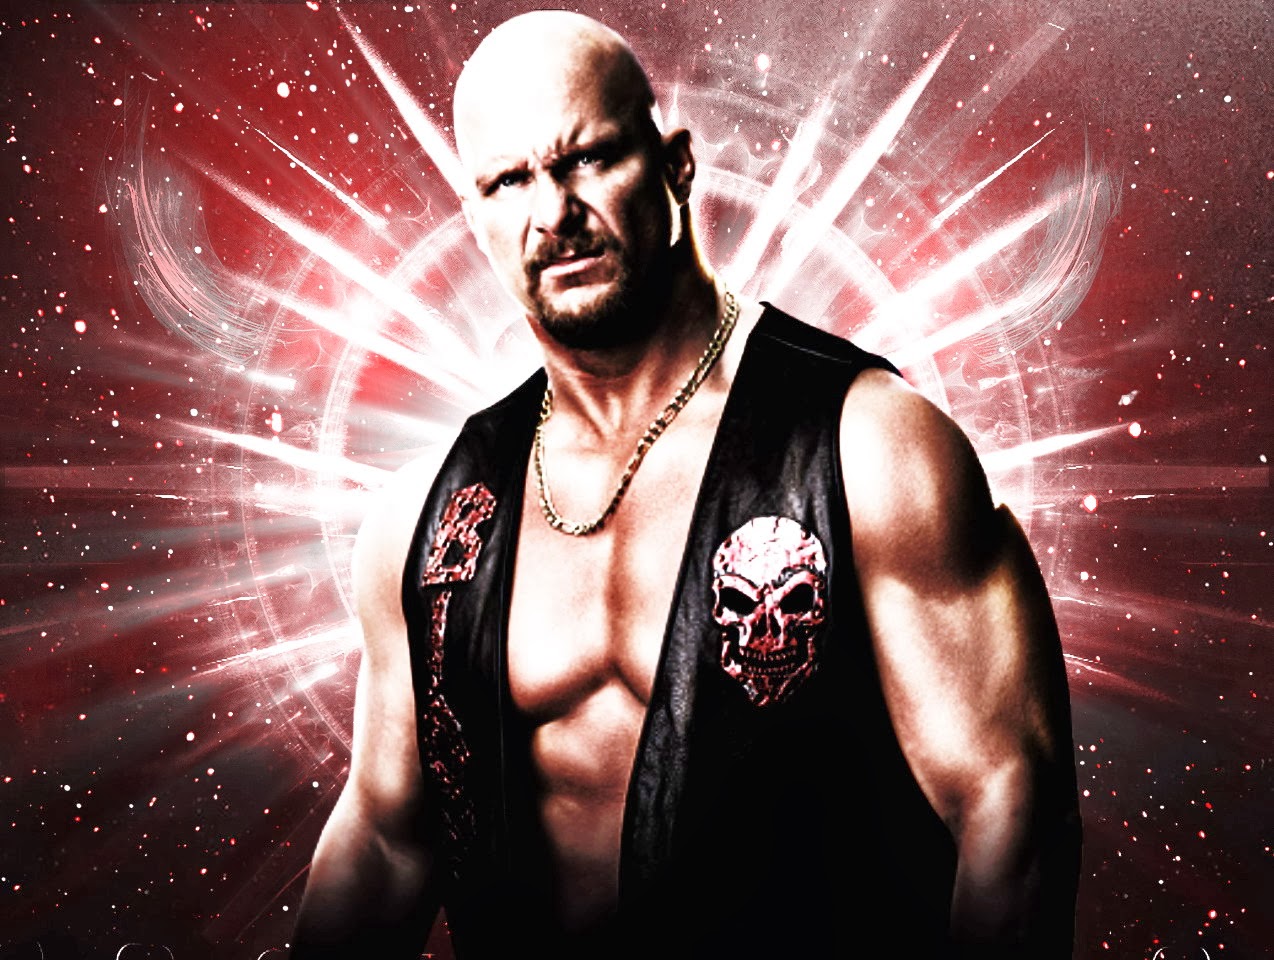 stone cold steve austin wallpapers stone cold steve austin wallpapers